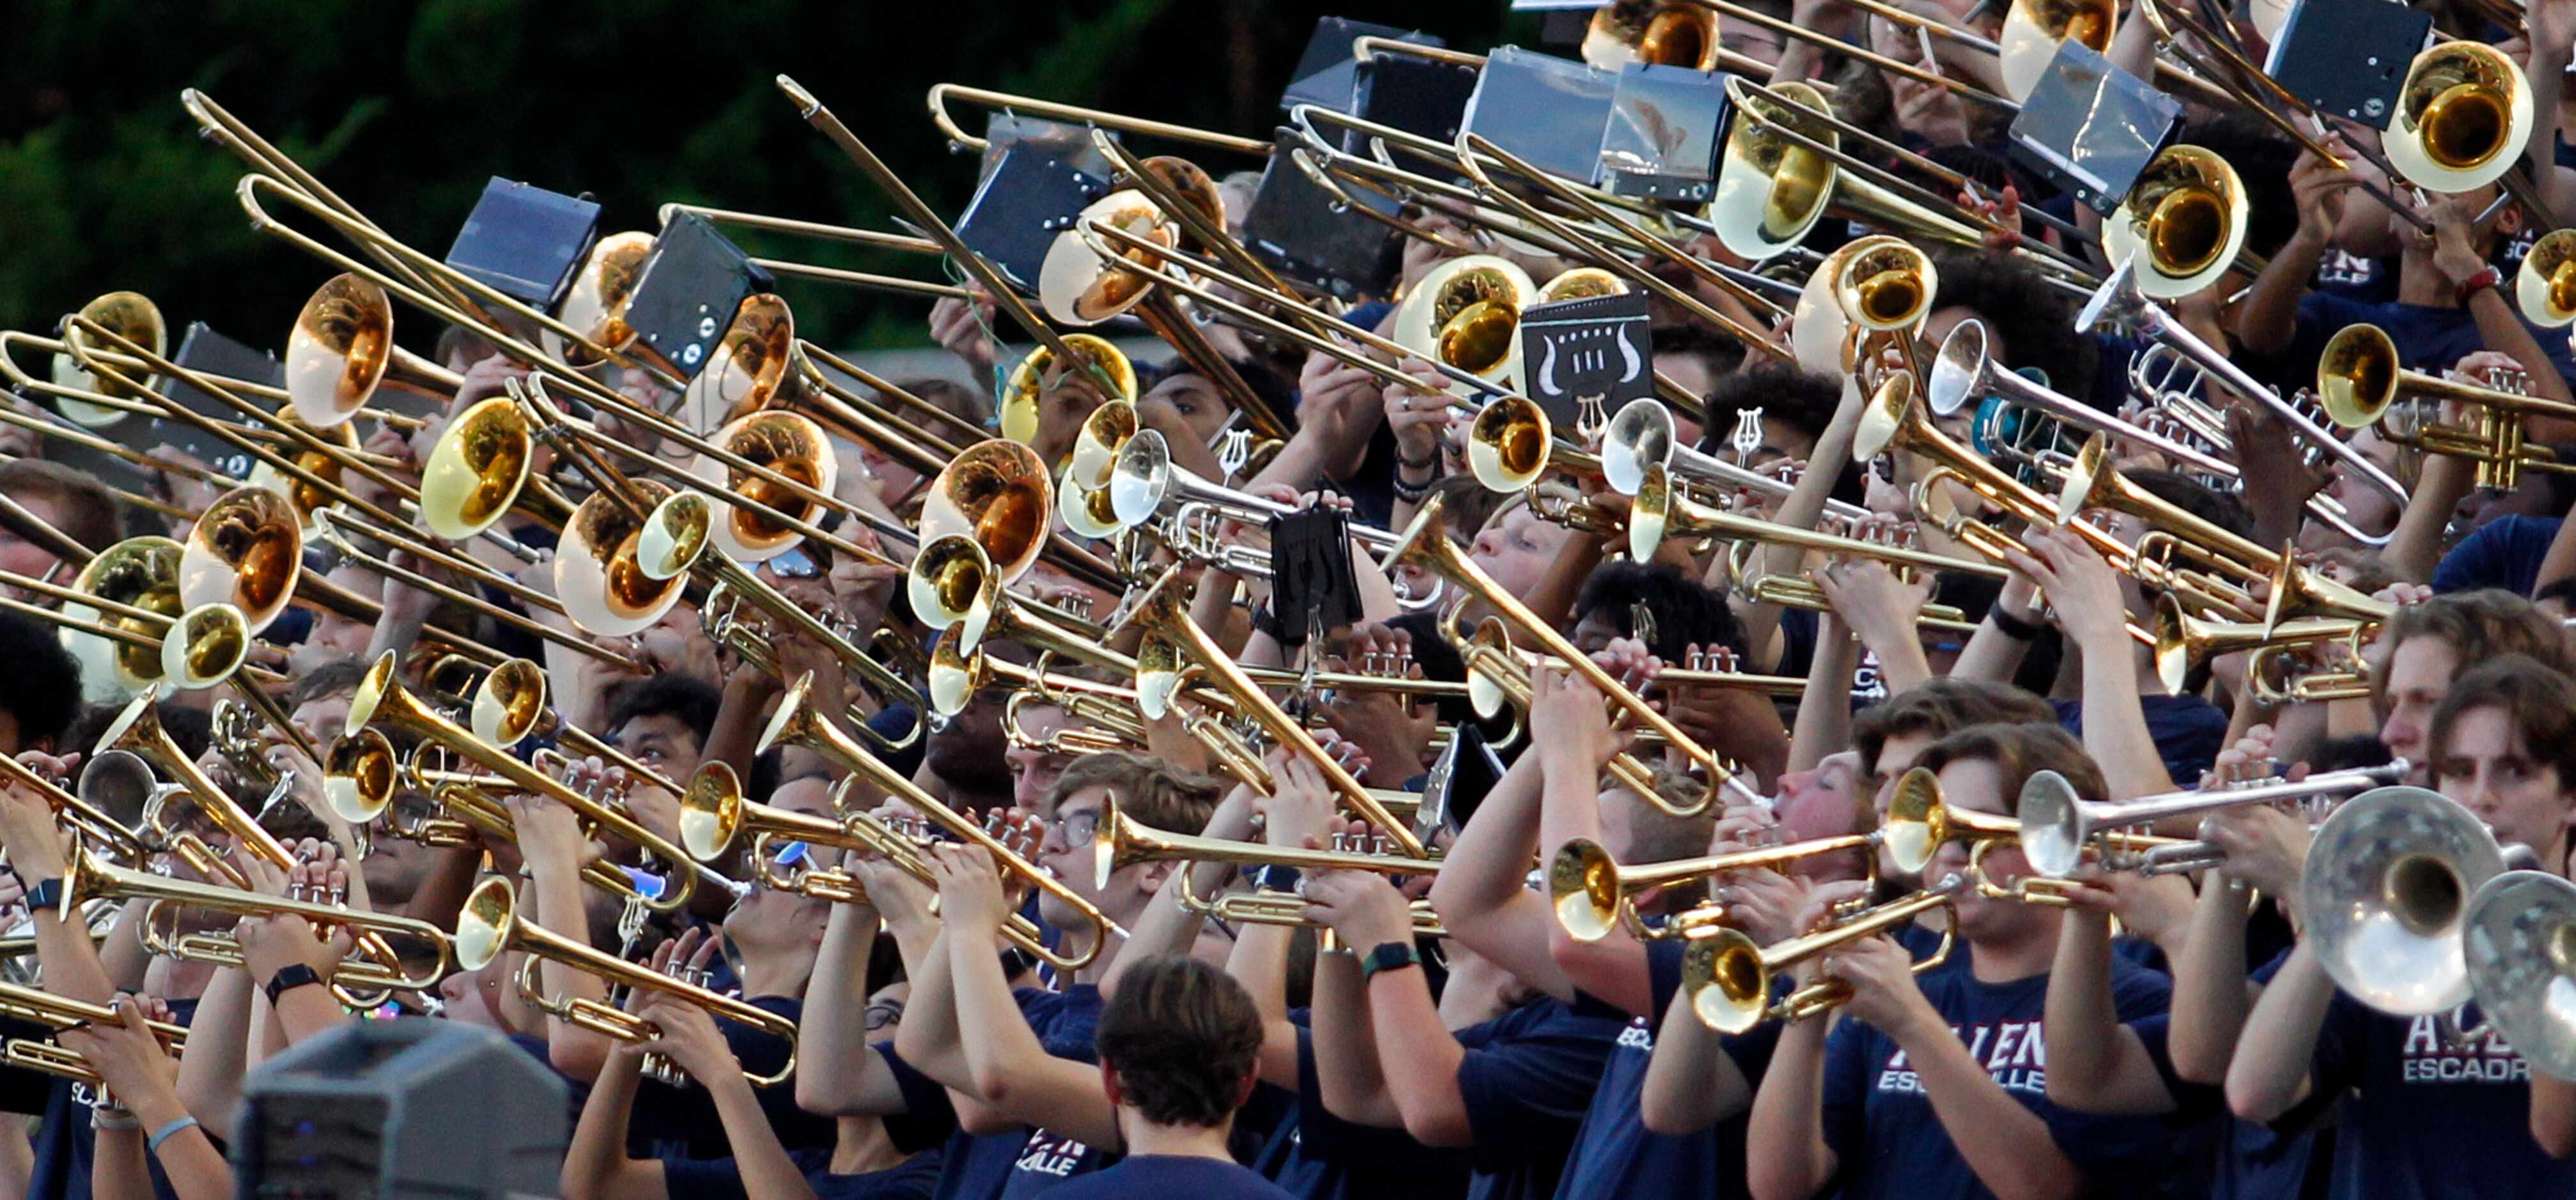 Touted as the largest band in the country, members of the brass section of the Allen High...